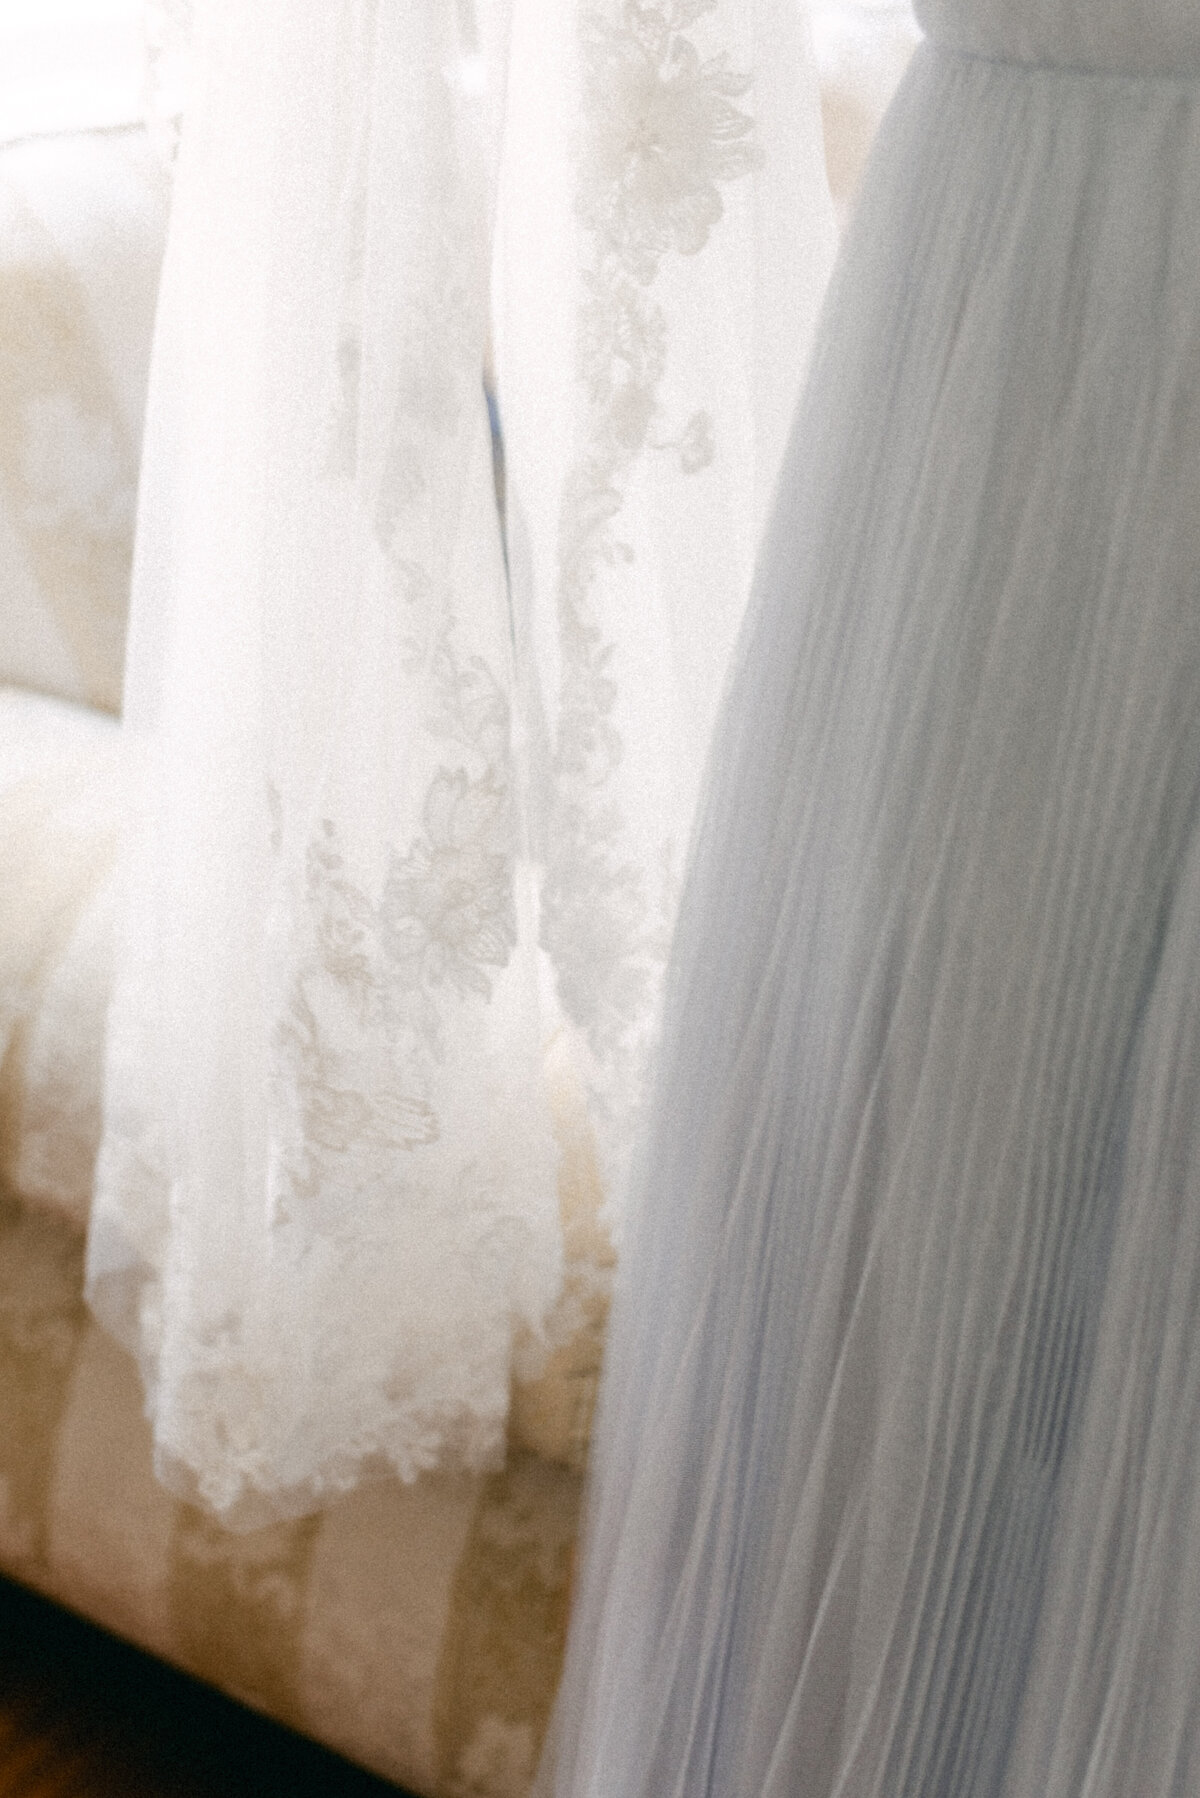 Details of the veil photographed by wedding photographer Hannika Gabrielsson.